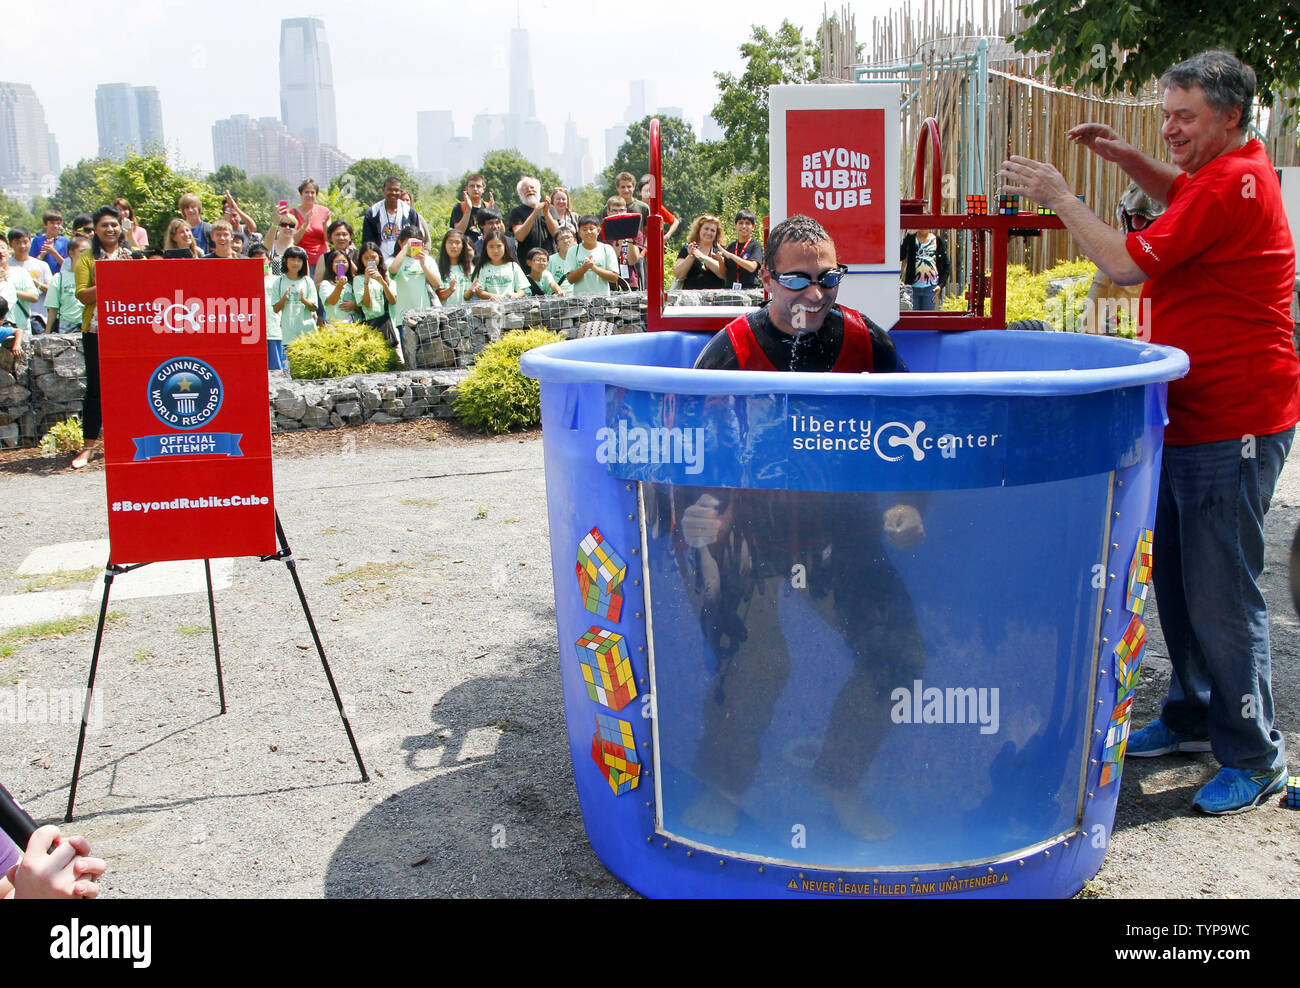 North American Speed Cube Champion Anthony Brooks smiles as he emerges from a water tank after he breaks the Guinness Record for most Rubik's Cube puzzles solved underwater in one breath at National Rubik's Cube Championship at Liberty Science Center in Jersey City, NJ on August 1, 2014. Brooks set a new record solving 5 cubes in 1:18 beating the old record of record 4 cubes solved in 1:30.  UPI/John Angelillo Stock Photo